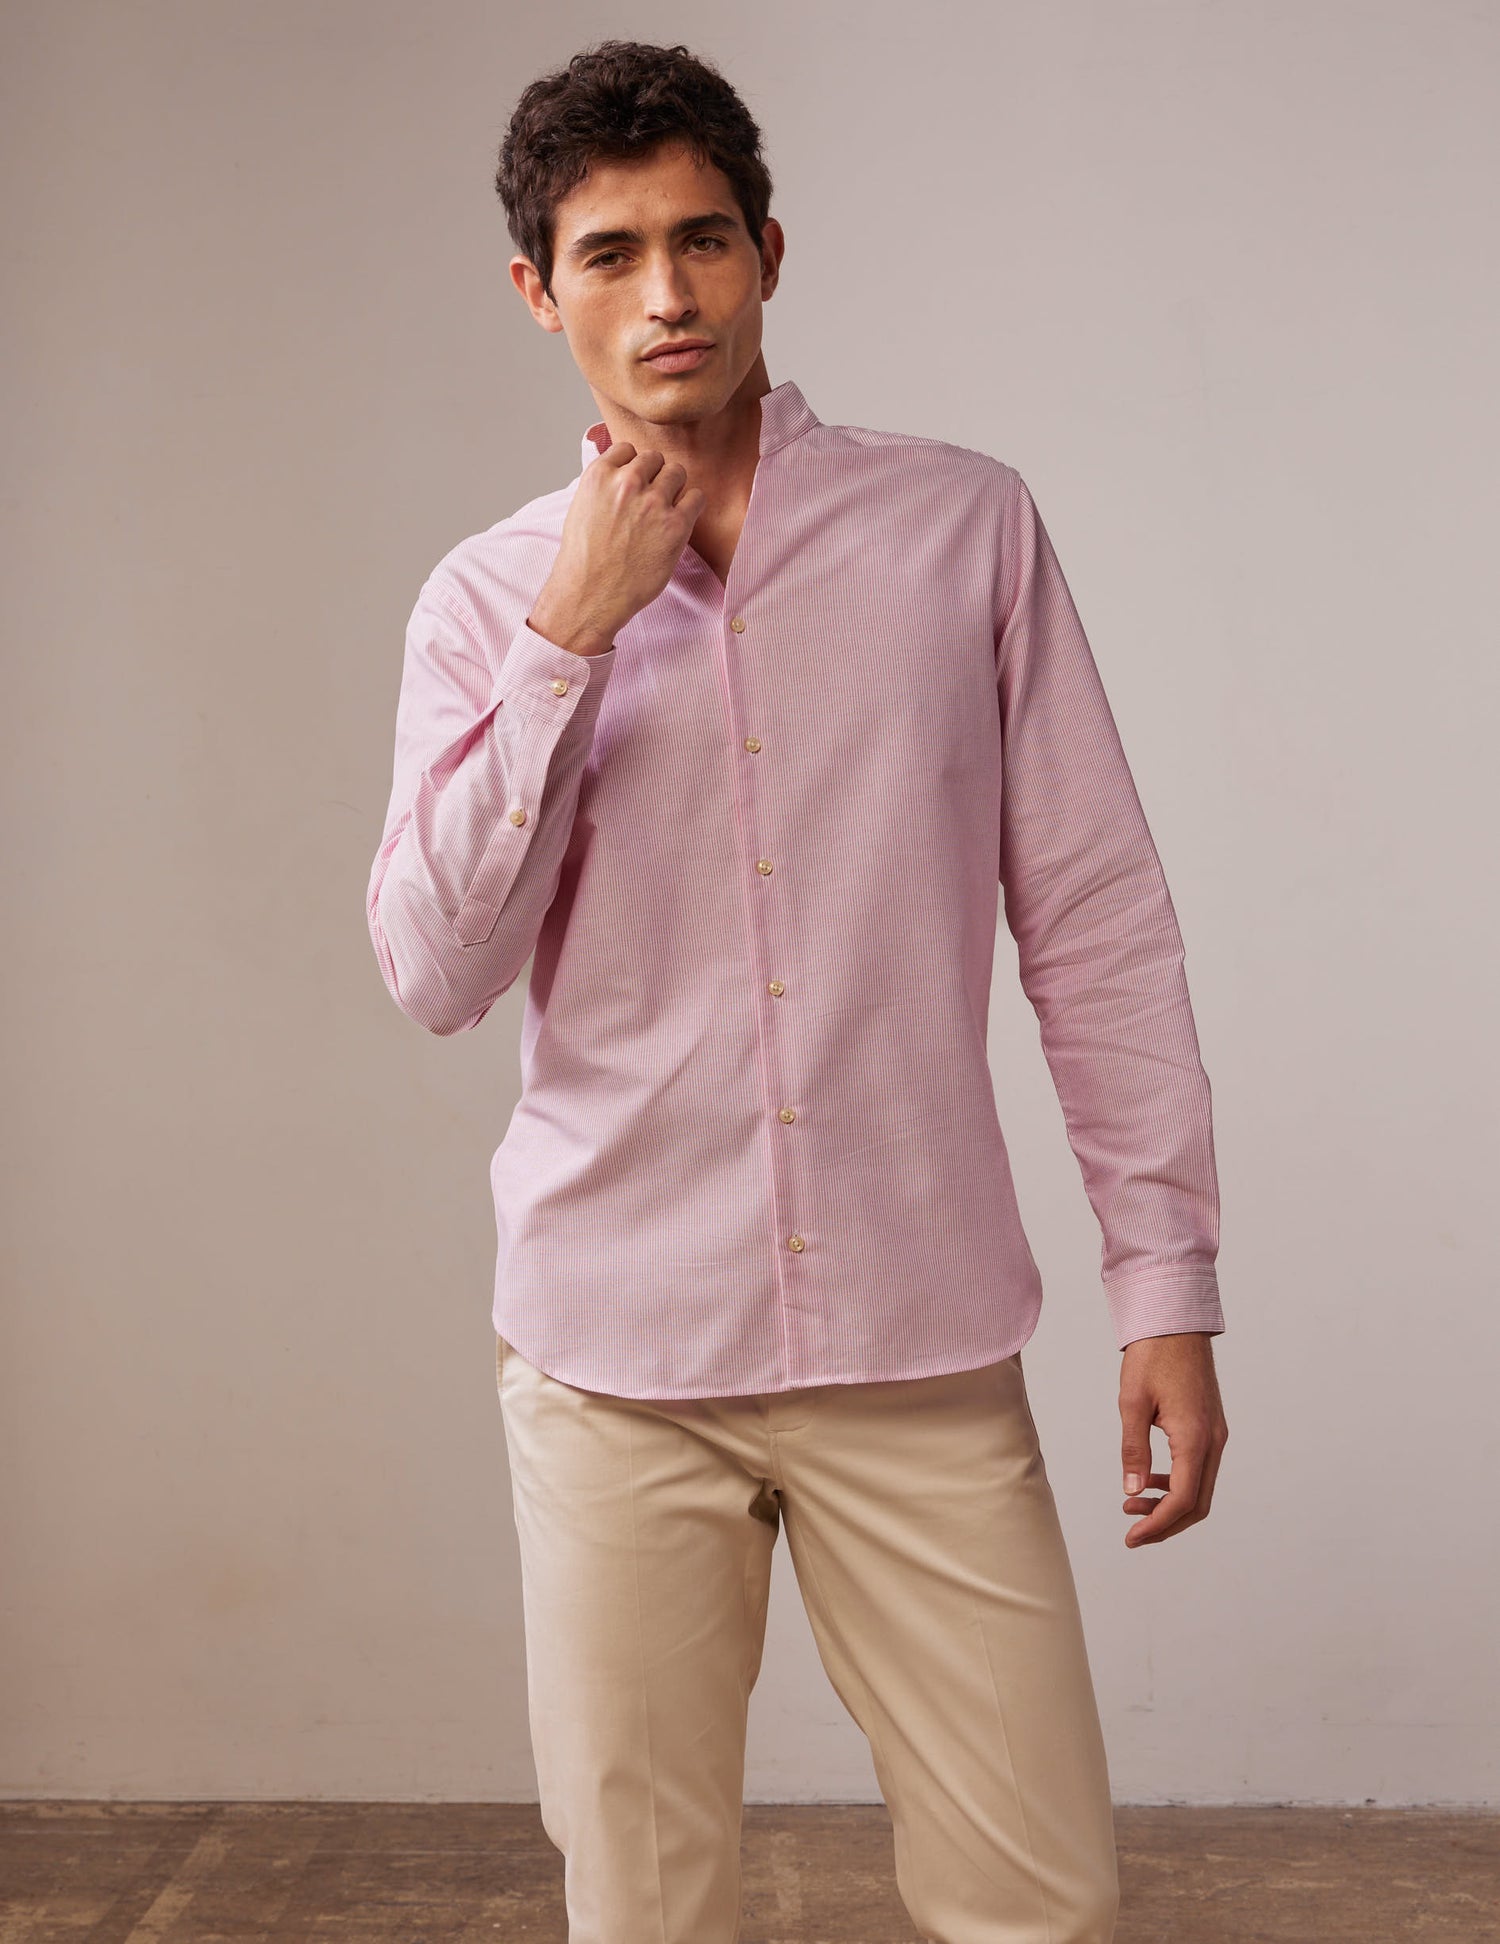 Striped pink Carl shirt - Oxford - Open straight Collar#3